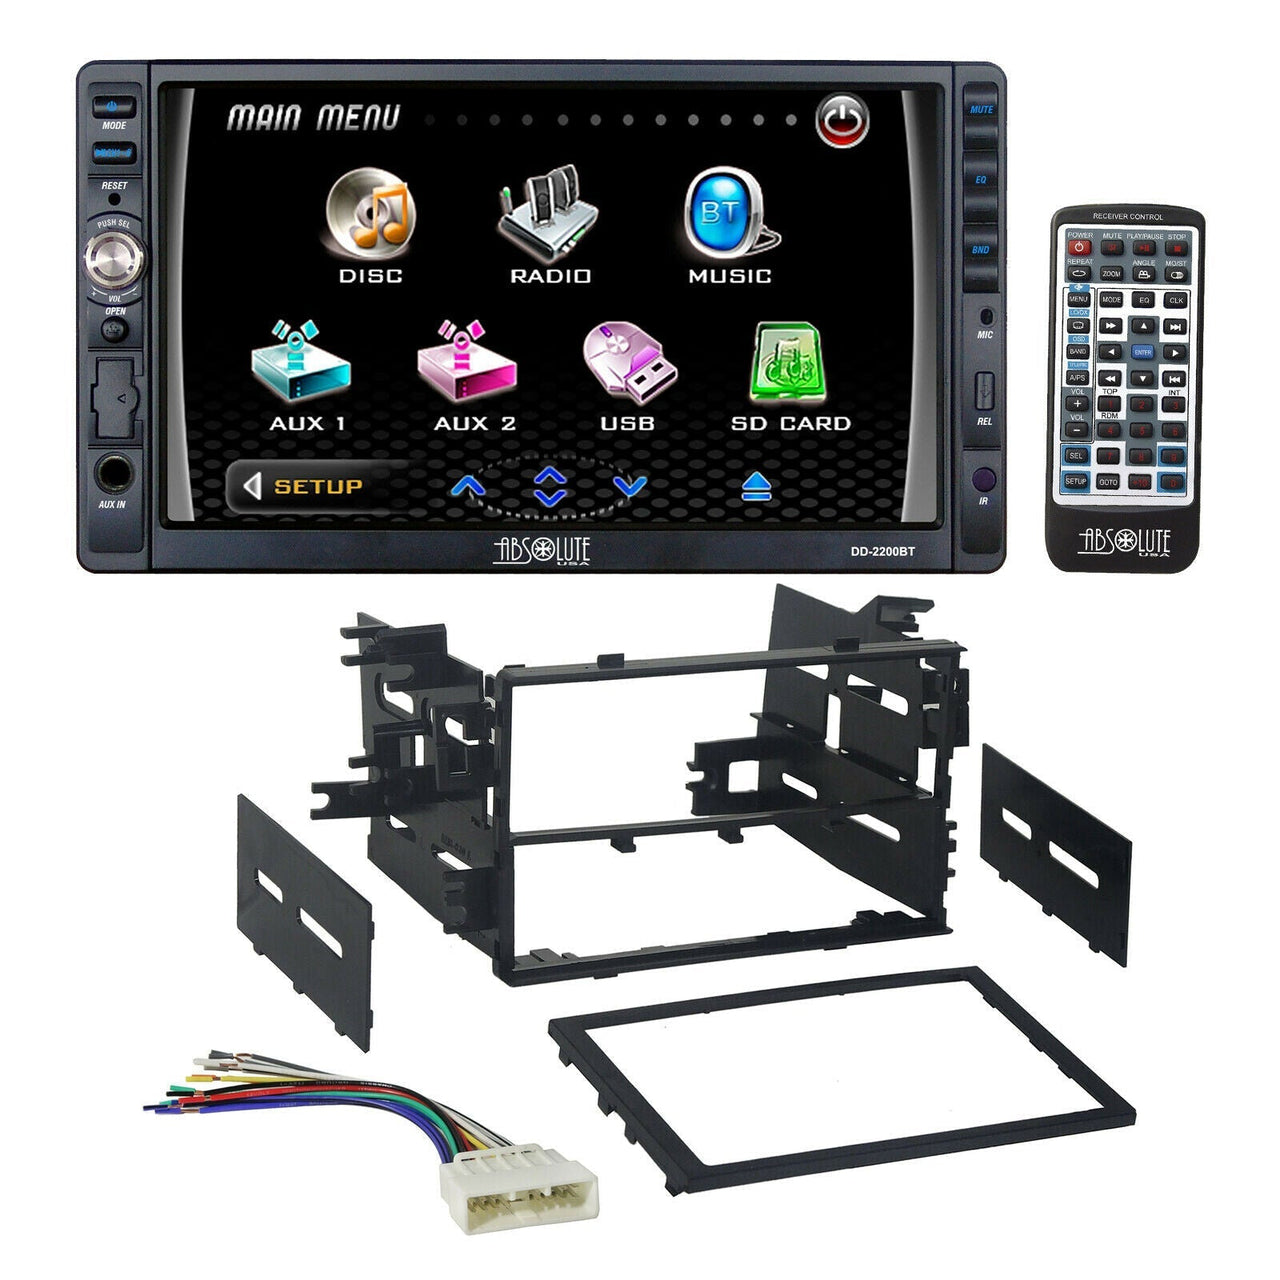 DD2200BT Double Din DVD, CD, MP3 Multimedia DVD CD MP3 Player Receiver With Dash Kit Harness for 86-up Honda Acura